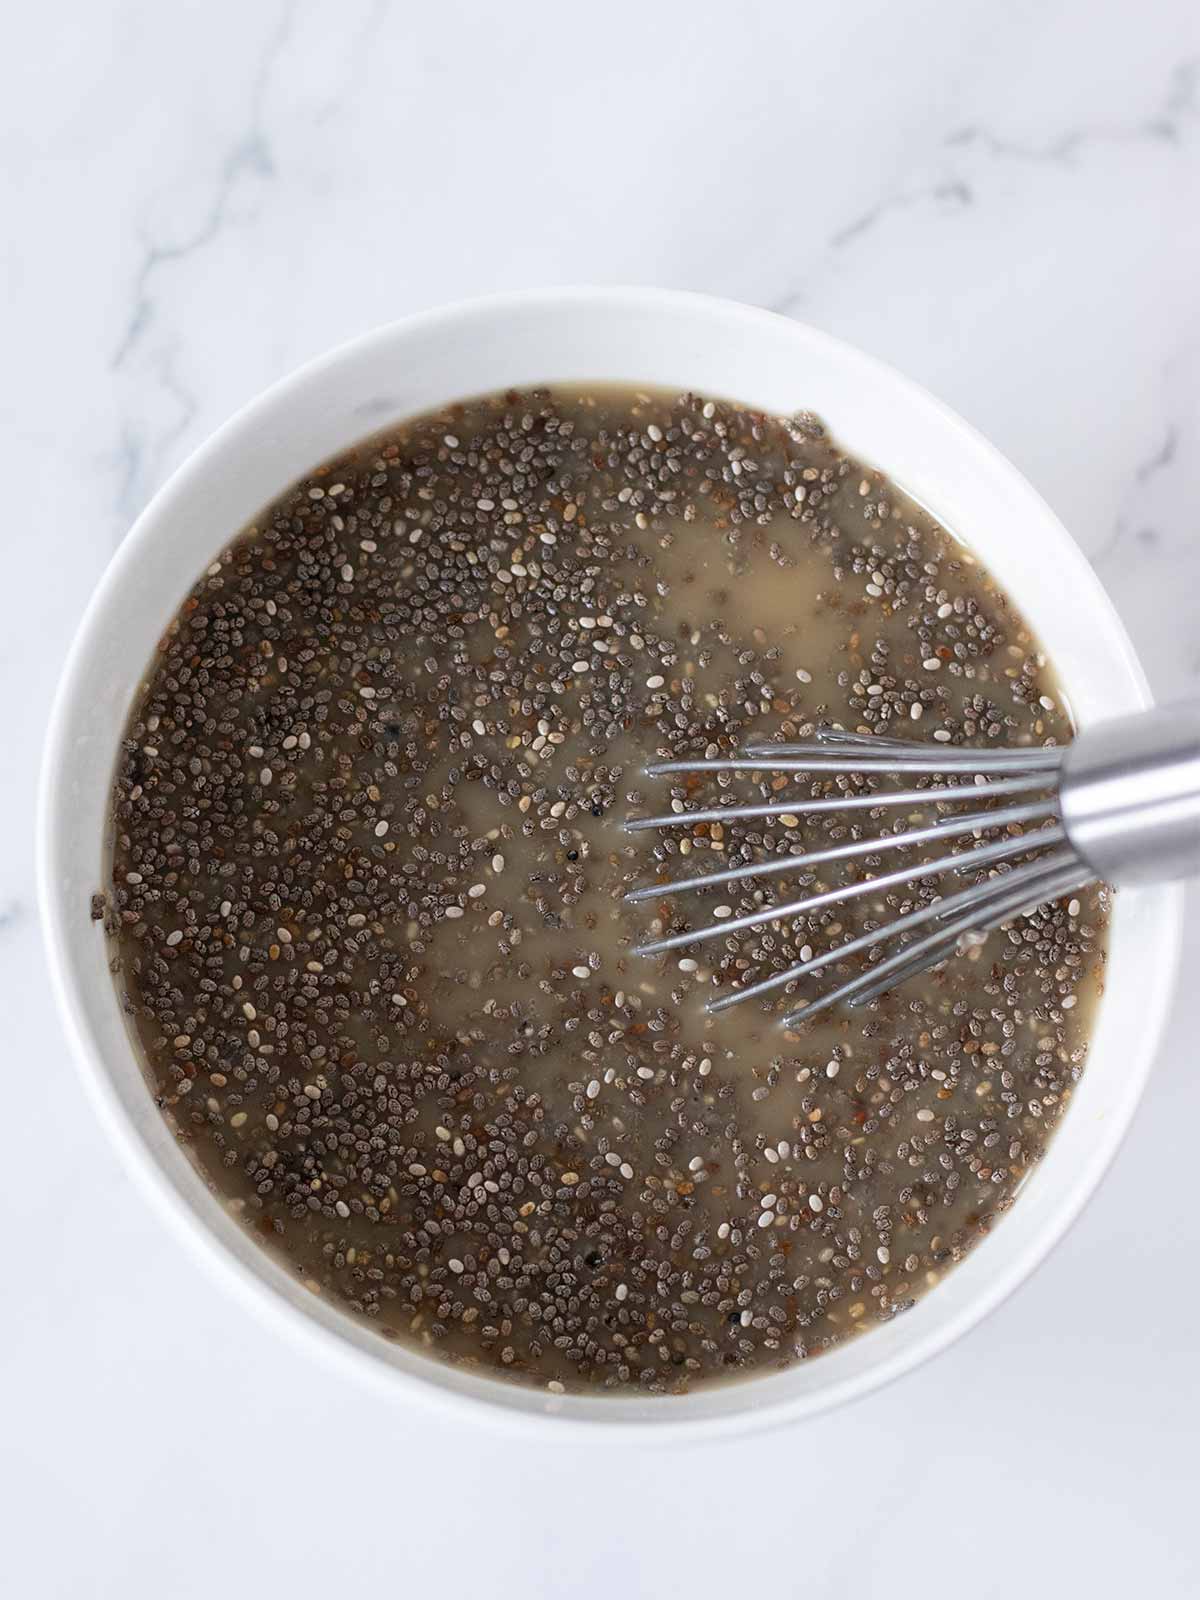 Preparing a healthy chia seed pudding in a bowl with a whisk.